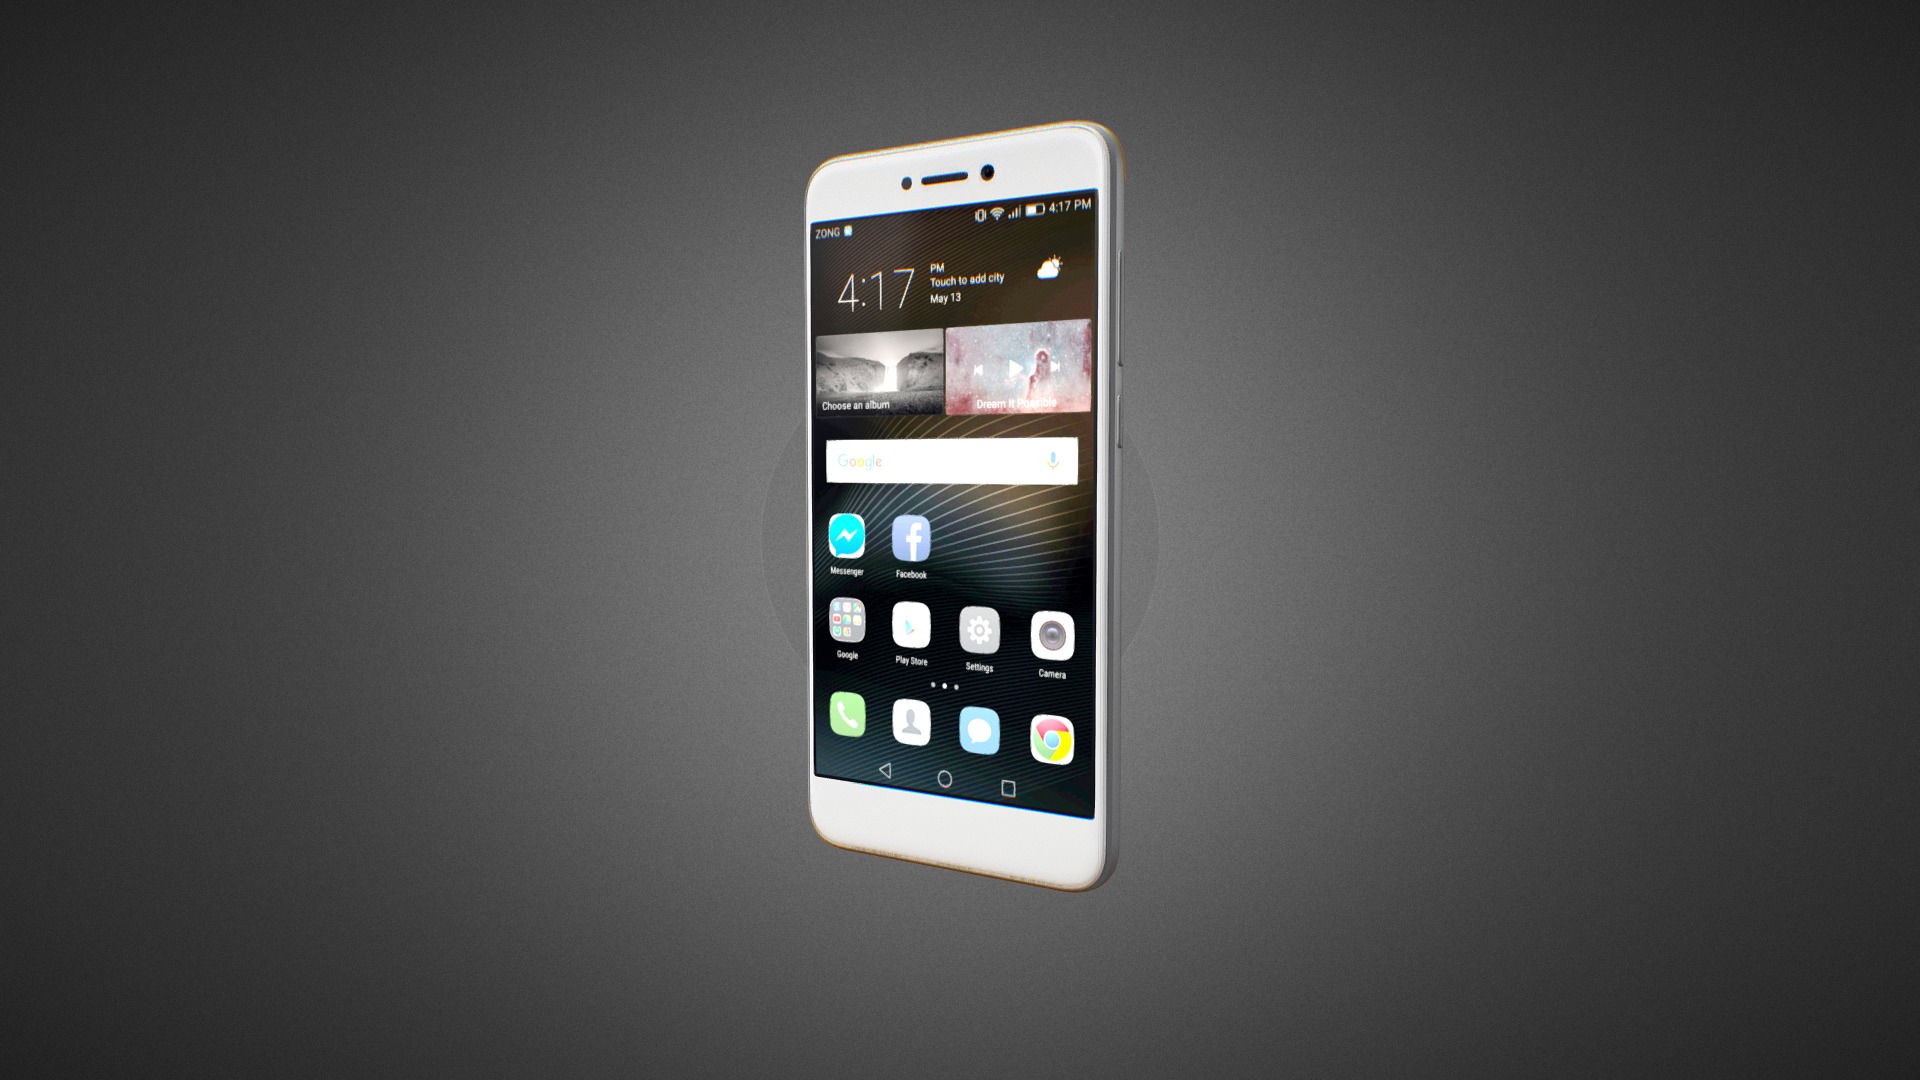 3D model Huawei P8 Lite 2017 for Element 3D - This is a 3D model of the Huawei P8 Lite 2017 for Element 3D. The 3D model is about a cell phone on a table.